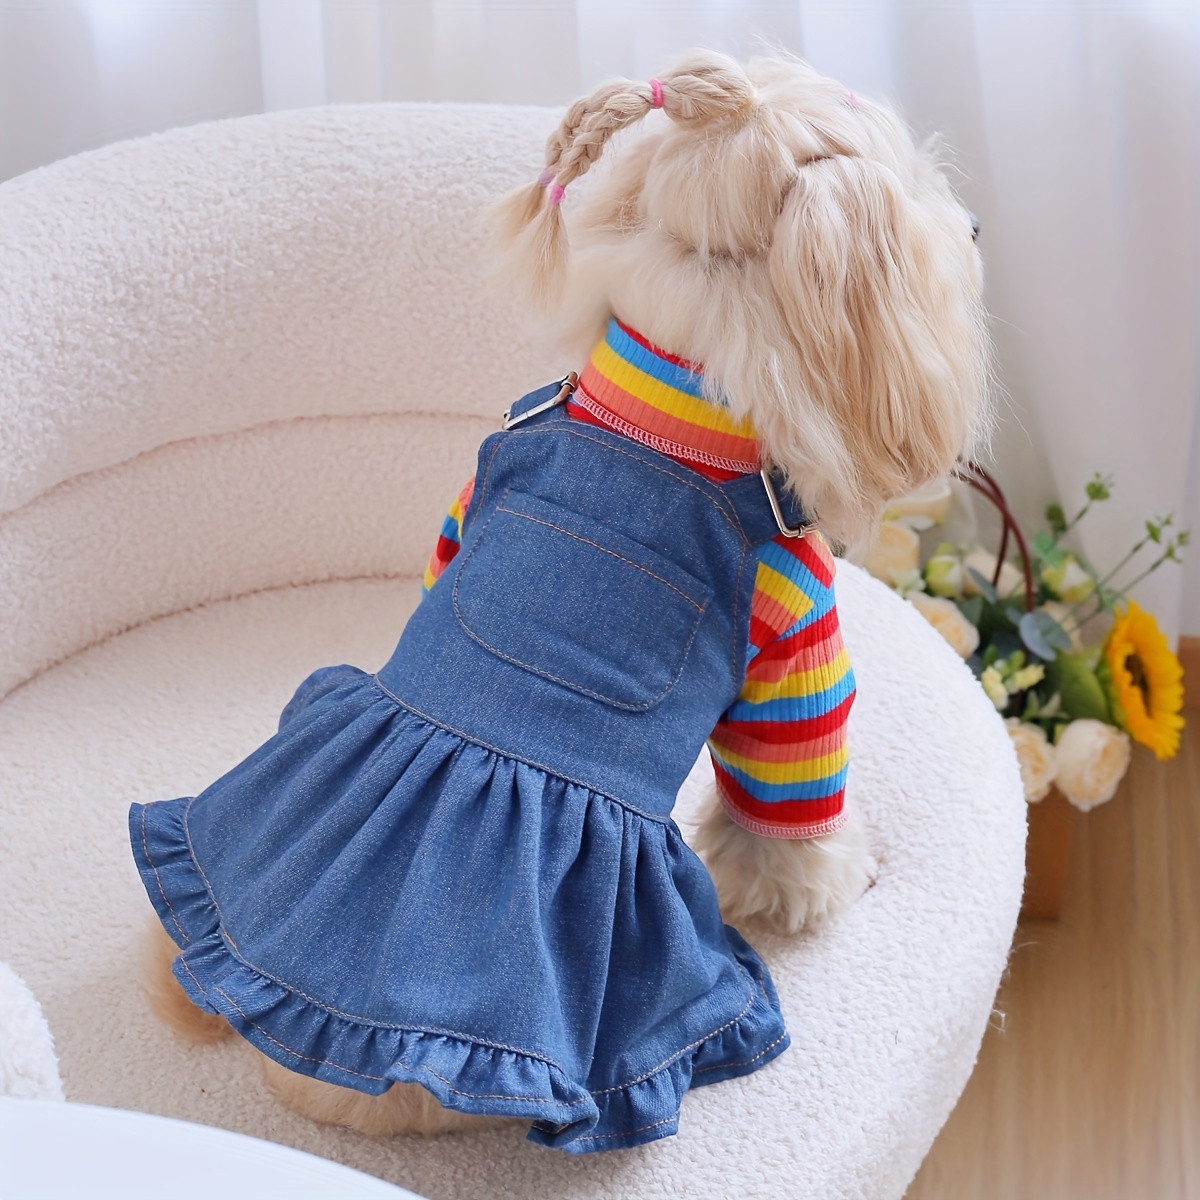 

3-in-1 Pet Outfit Set For Dogs & Cats - Stretchy Rainbow Tee & Denim Skirt Combo With Suspenders, All-season Comfort, Ideal For Small To Medium Breeds